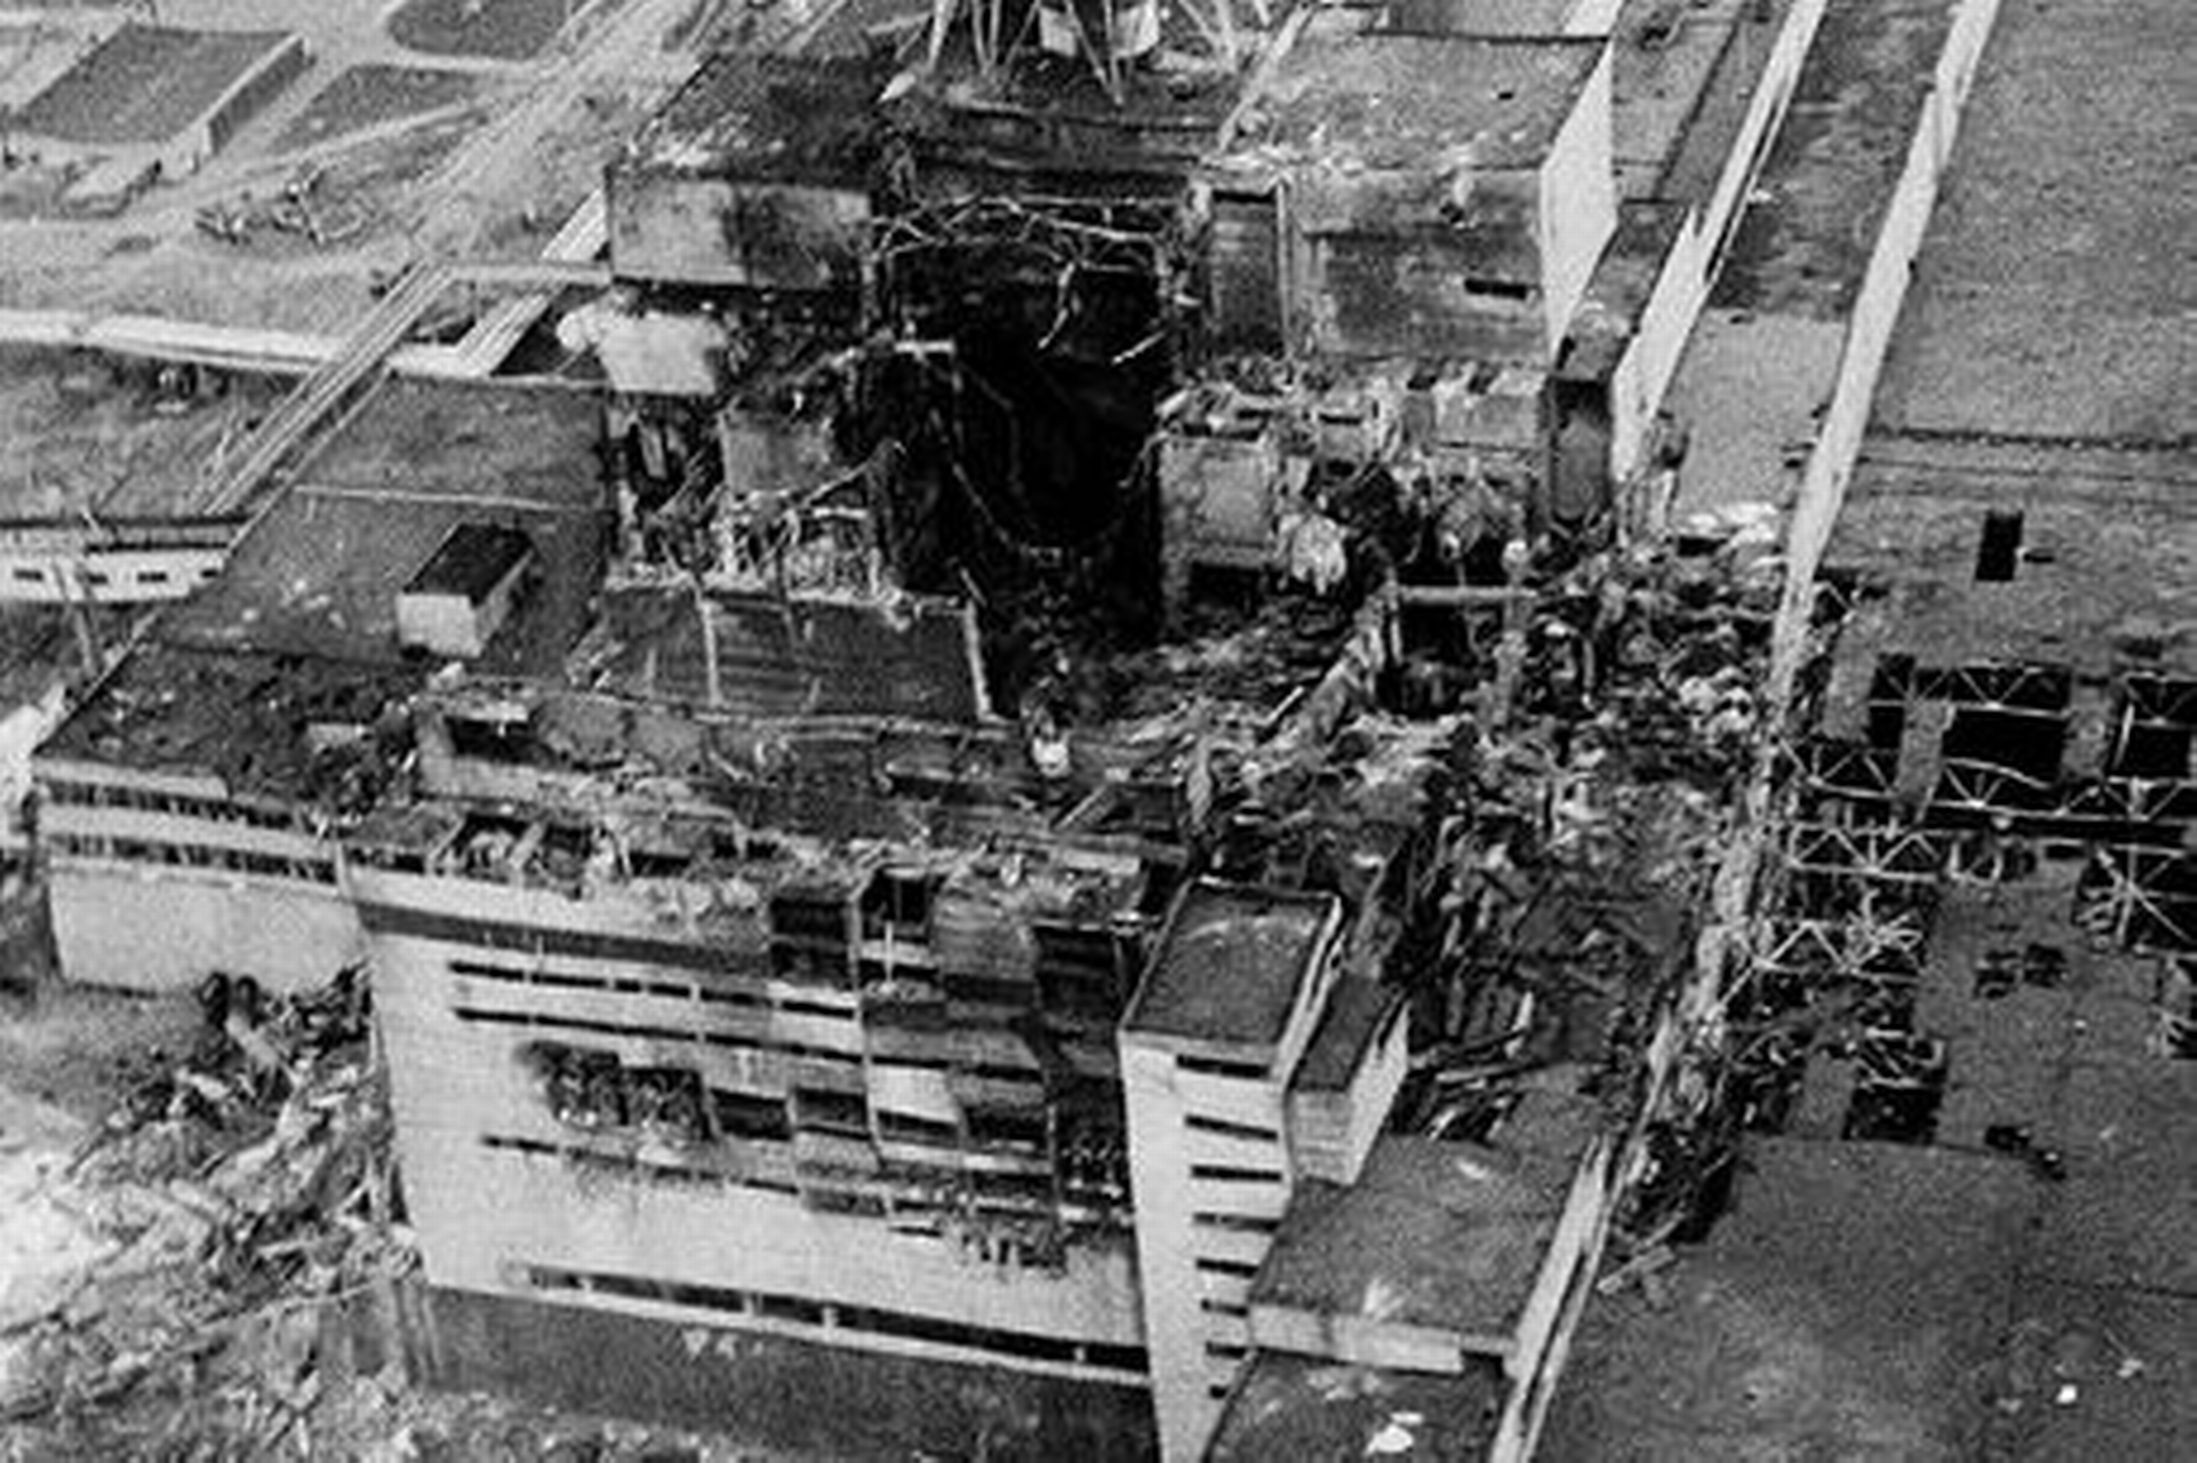 chernobyl-nuclear-disaster-384072564